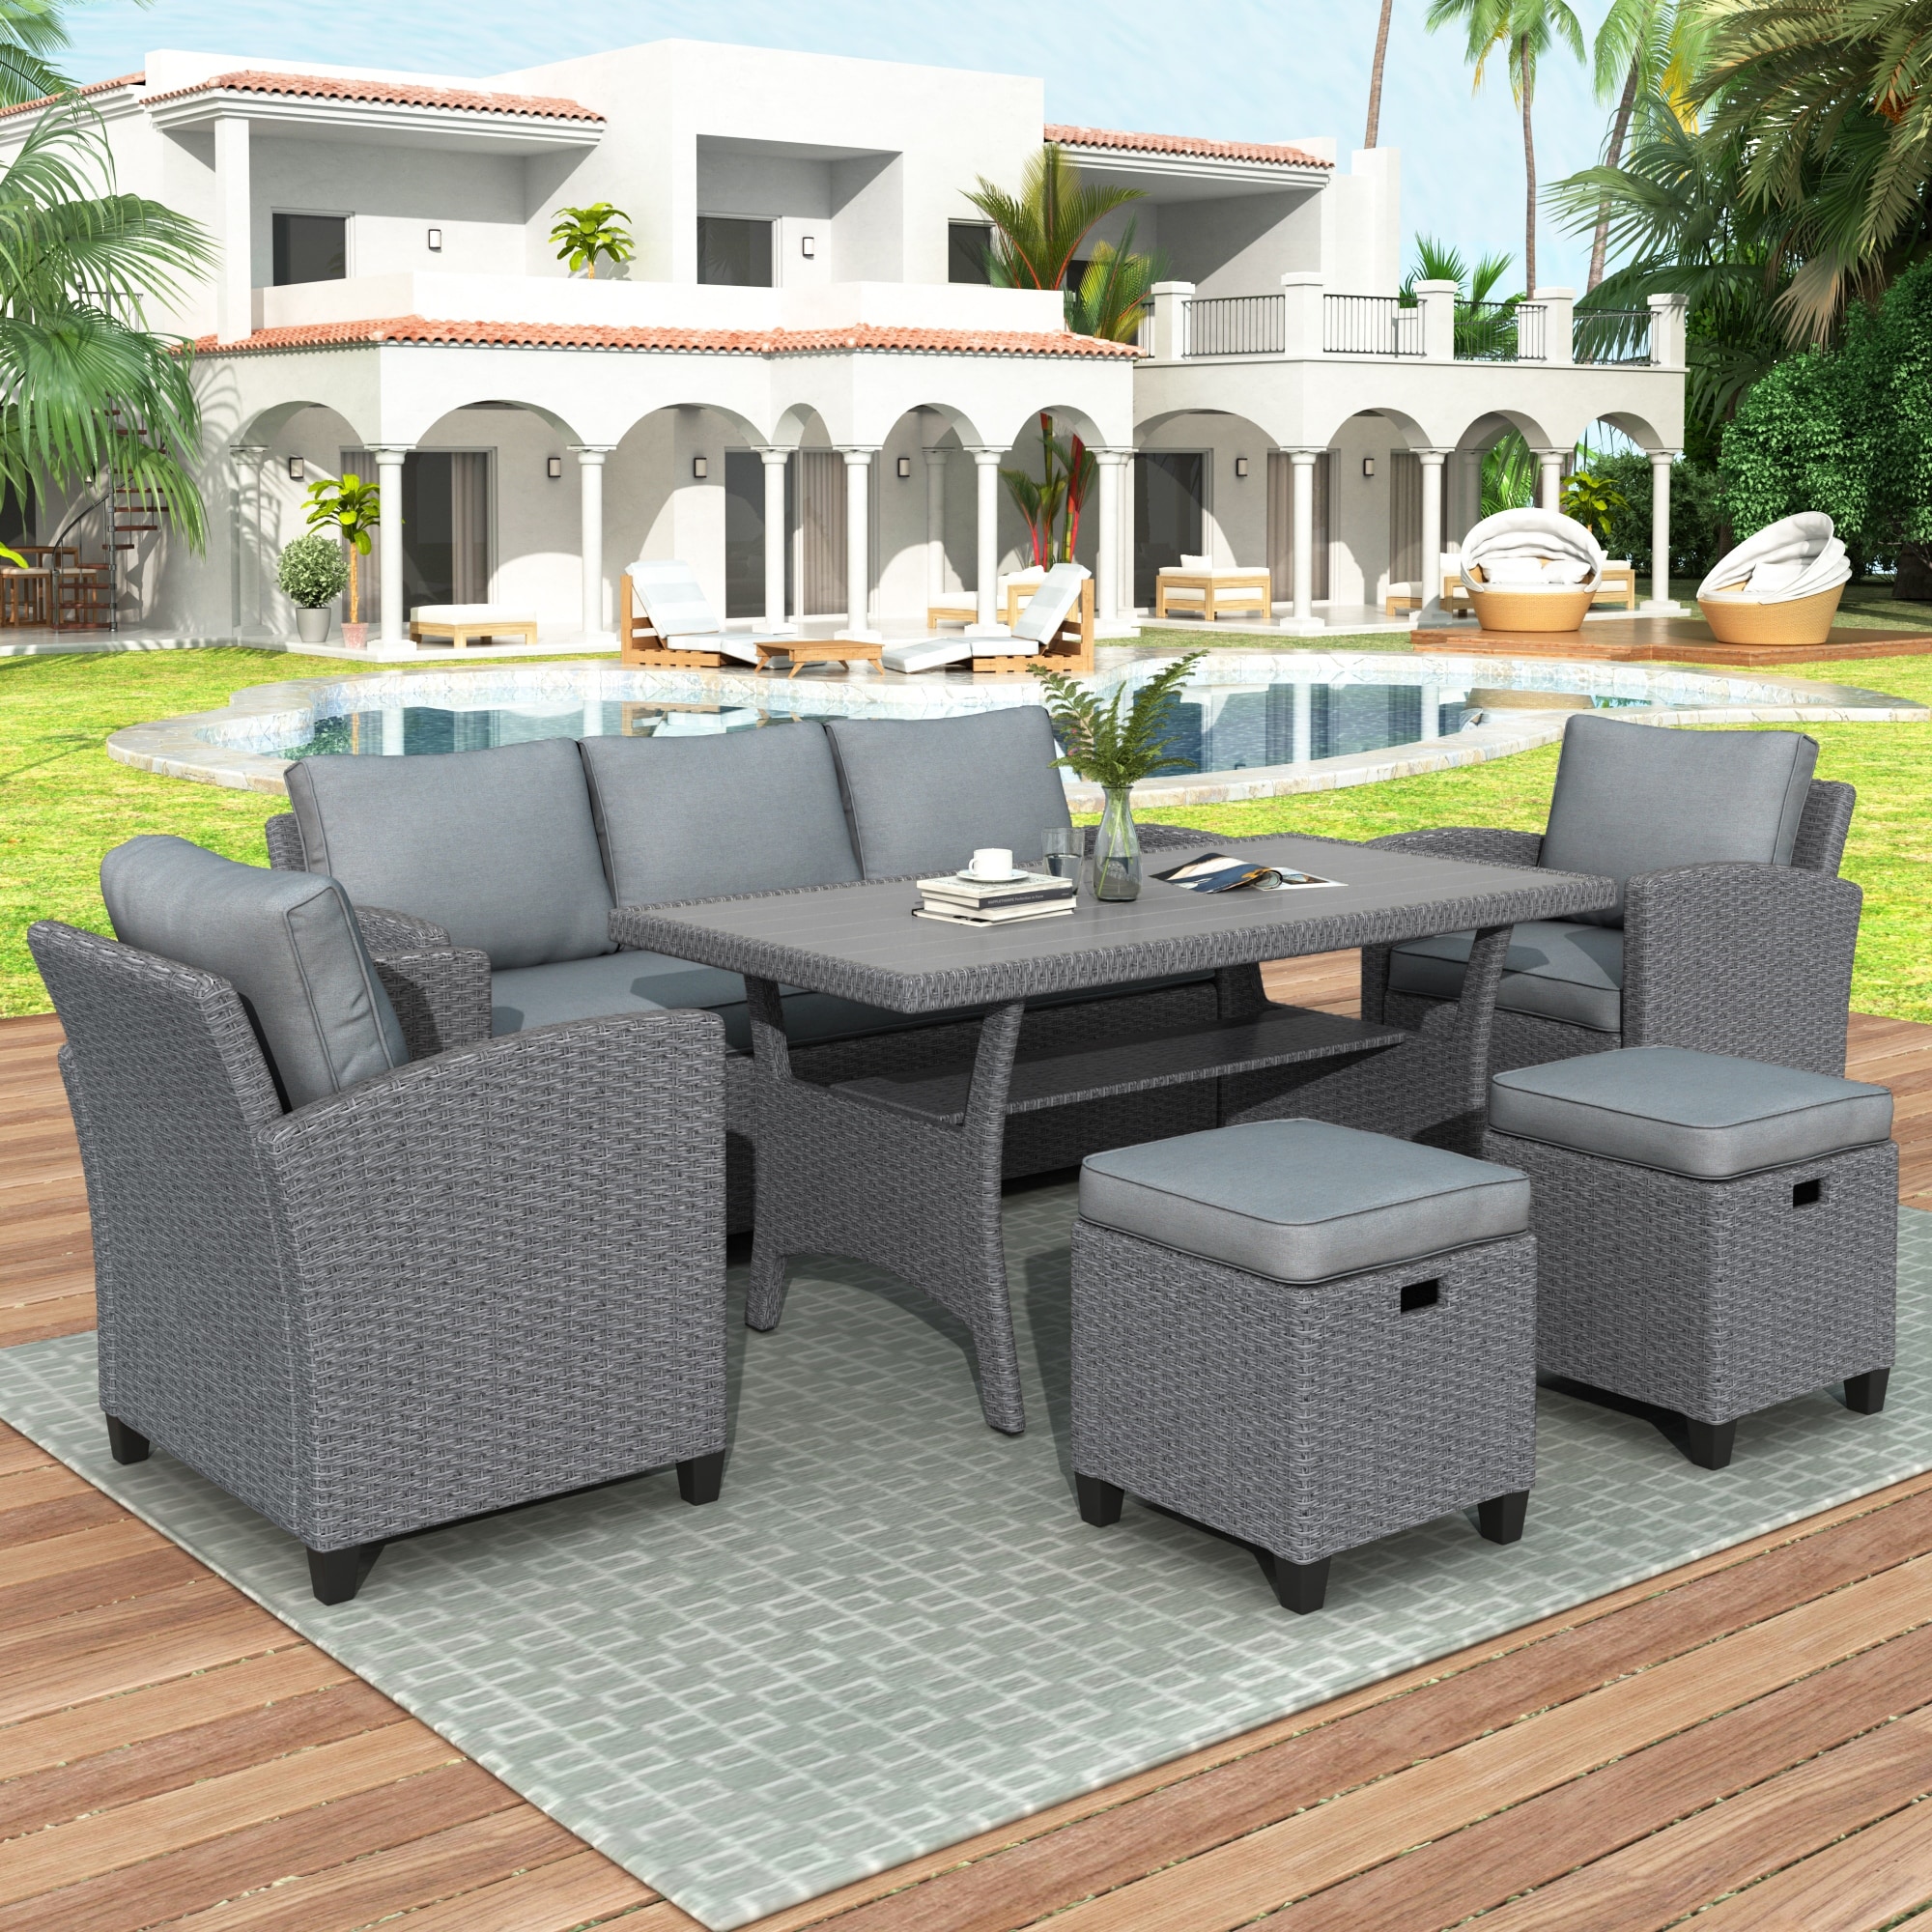 Outdoor Rattan Wicker Sofa Set With Table  Thick Cushions